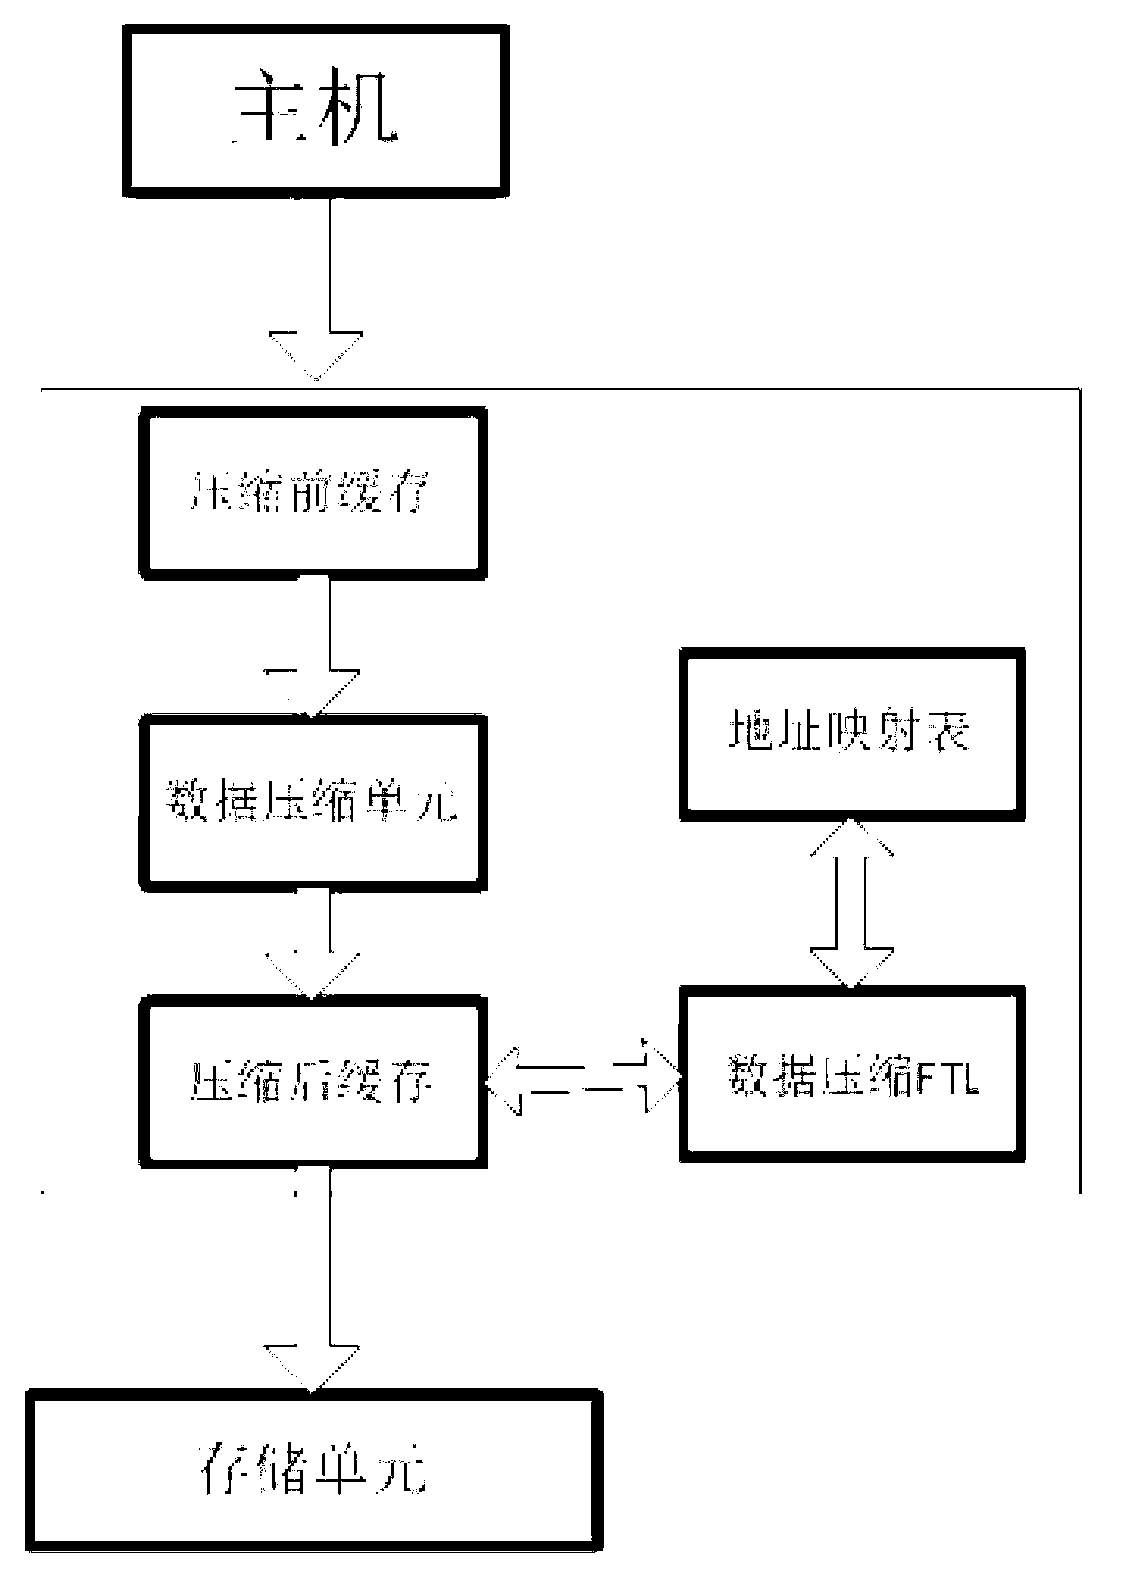 Writing-in and reading method of solid-state memory system flash translation layer (FTL) with compression function